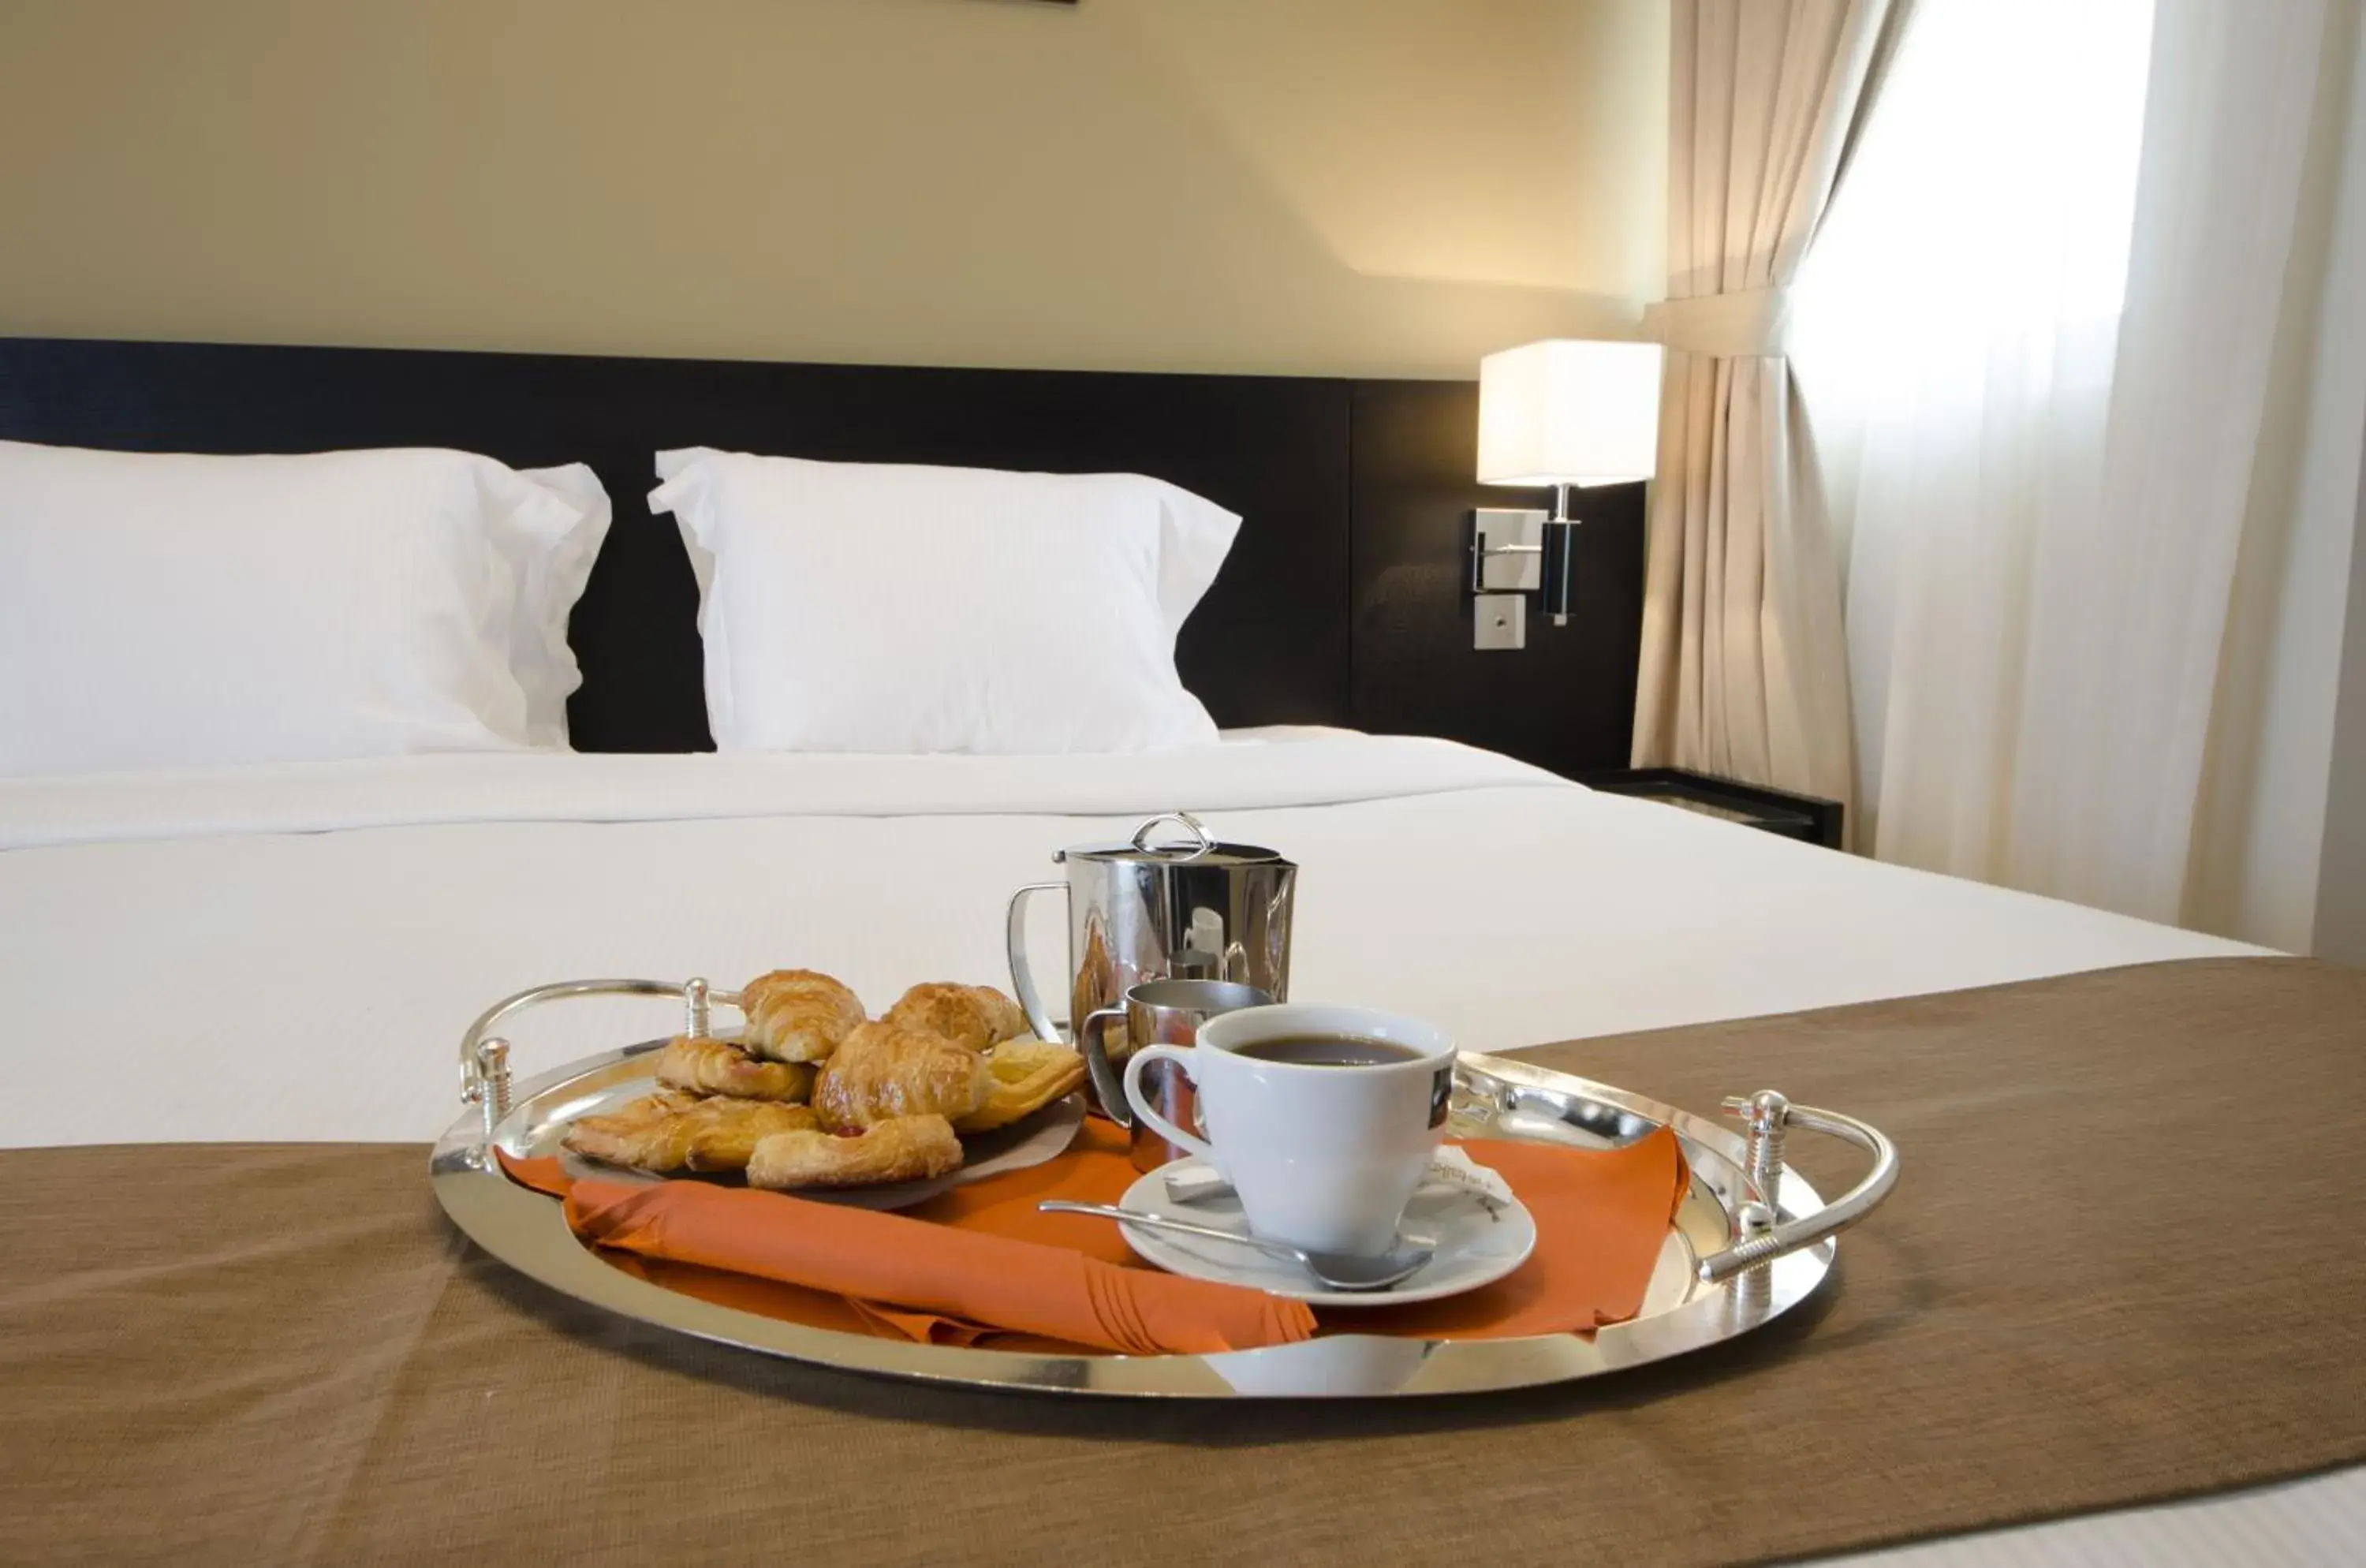 Bed, Breakfast in The Apartments, Dubai World Trade Centre Hotel Apartments